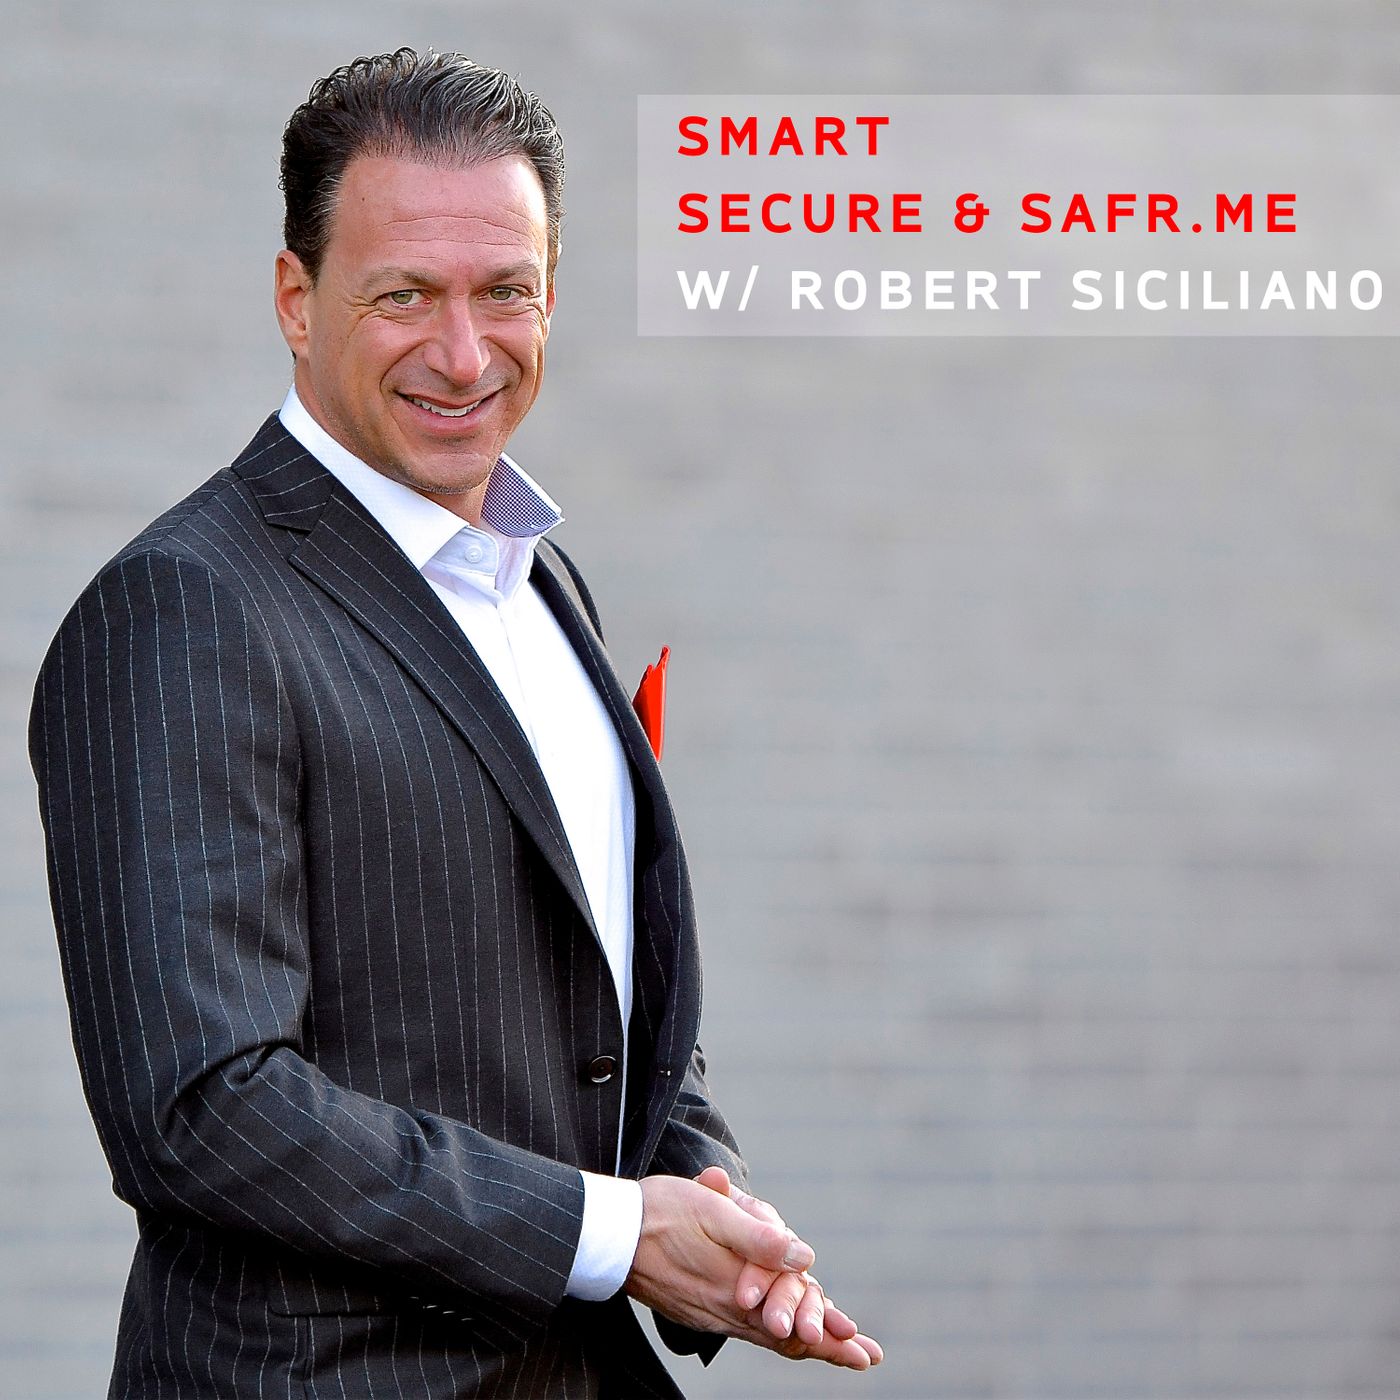 Smart Secure and Safr.me with Robert Siciliano